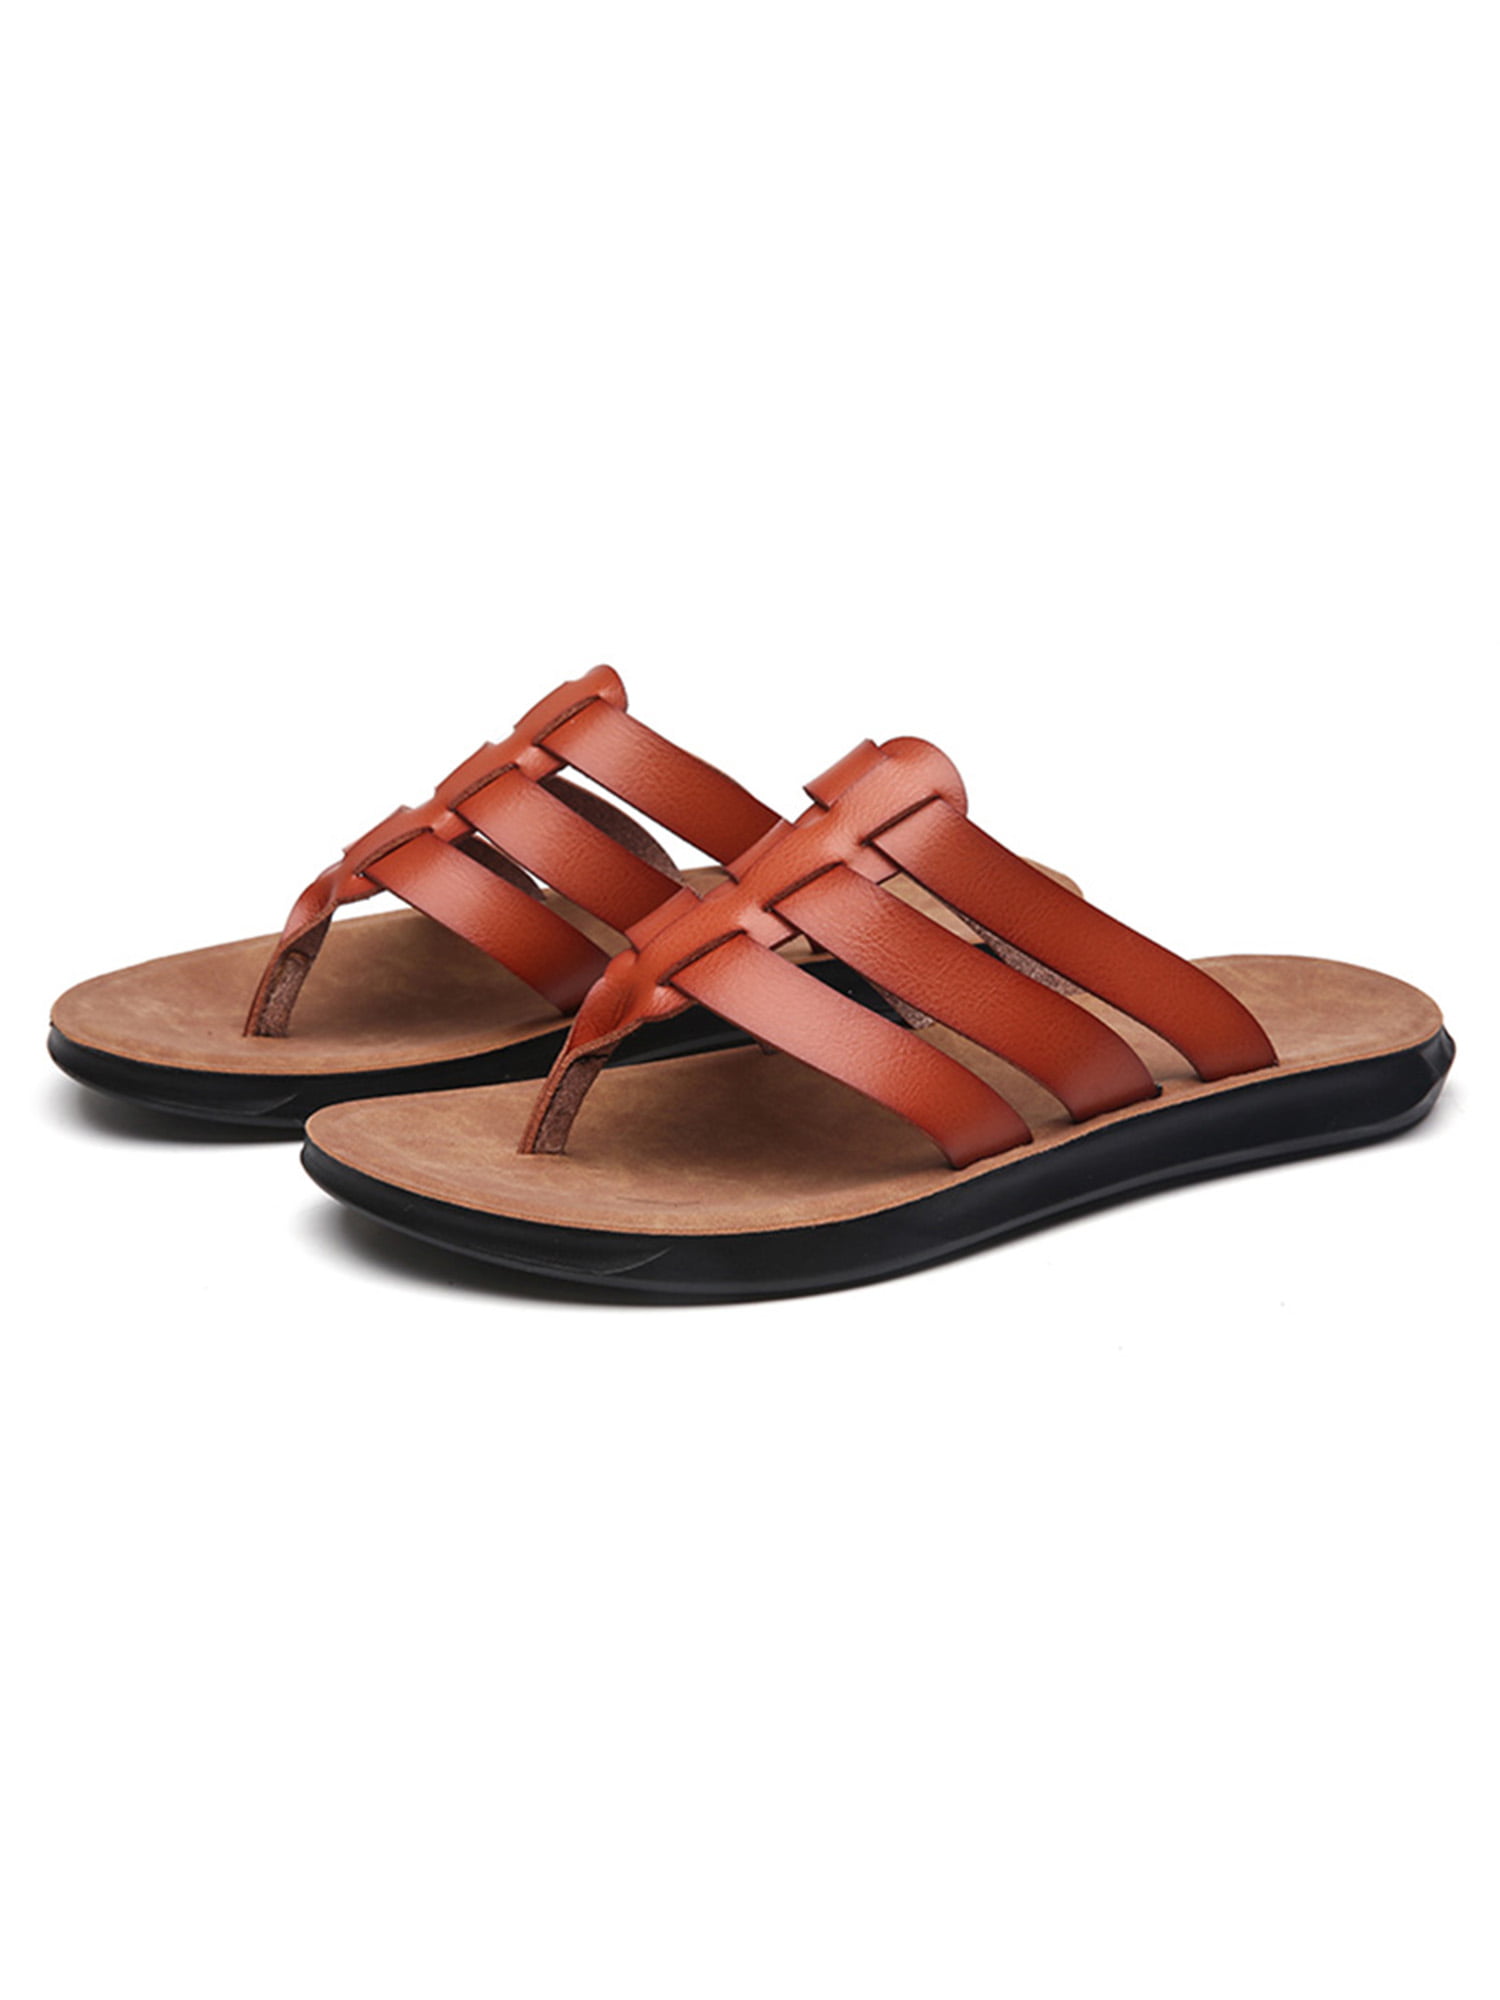 Mens Soft Summer Cross Over Straps Sandals Casual Beach Pool Shower Garden Casual Mules Comfort Surf Walk Gents Outdoor Holiday Flip Flop Strappy Shoes